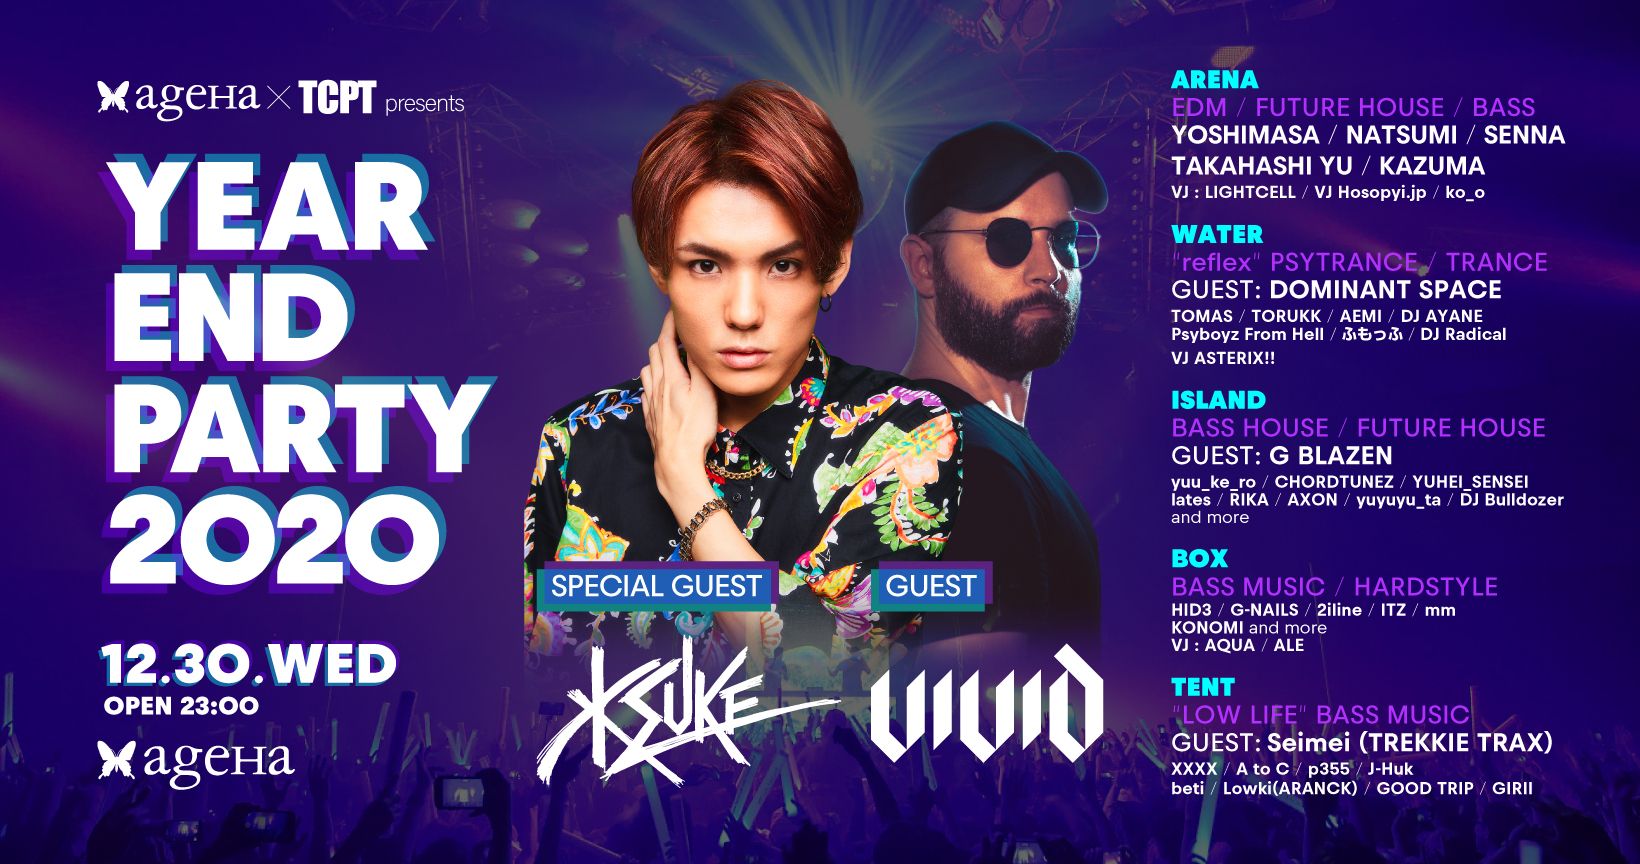 ageHa × TCPT Presents YEAR END PARTY 2020